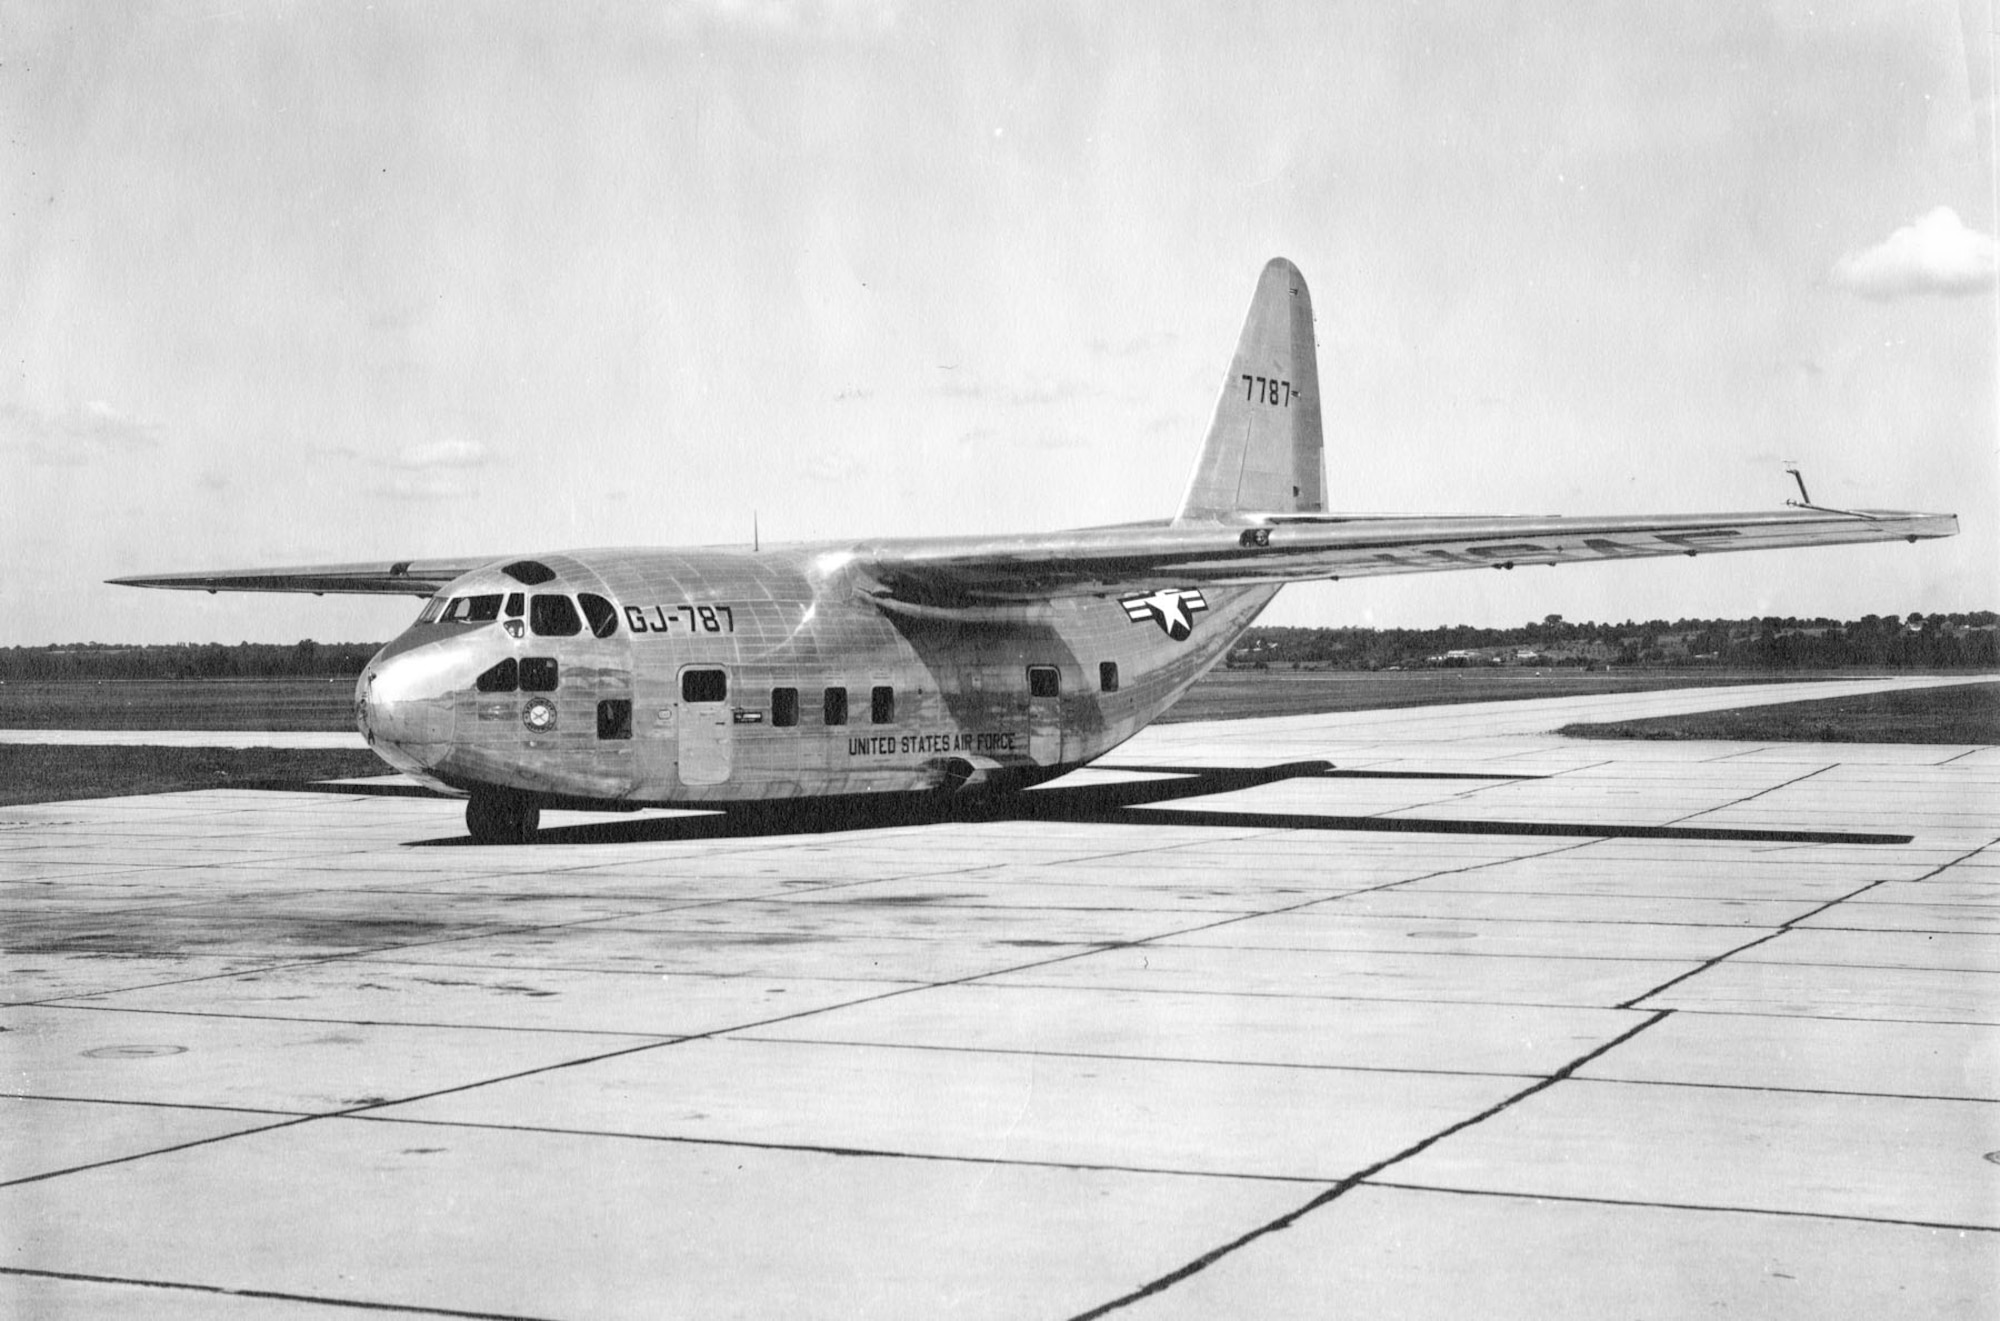 Chase XG-20 glider, from which the C-123 evolved. There was no provision for fuel in this glider, so the C-123’s fuel tanks were located in the rear part of the engine nacelles. (U.S. Air Force photo)